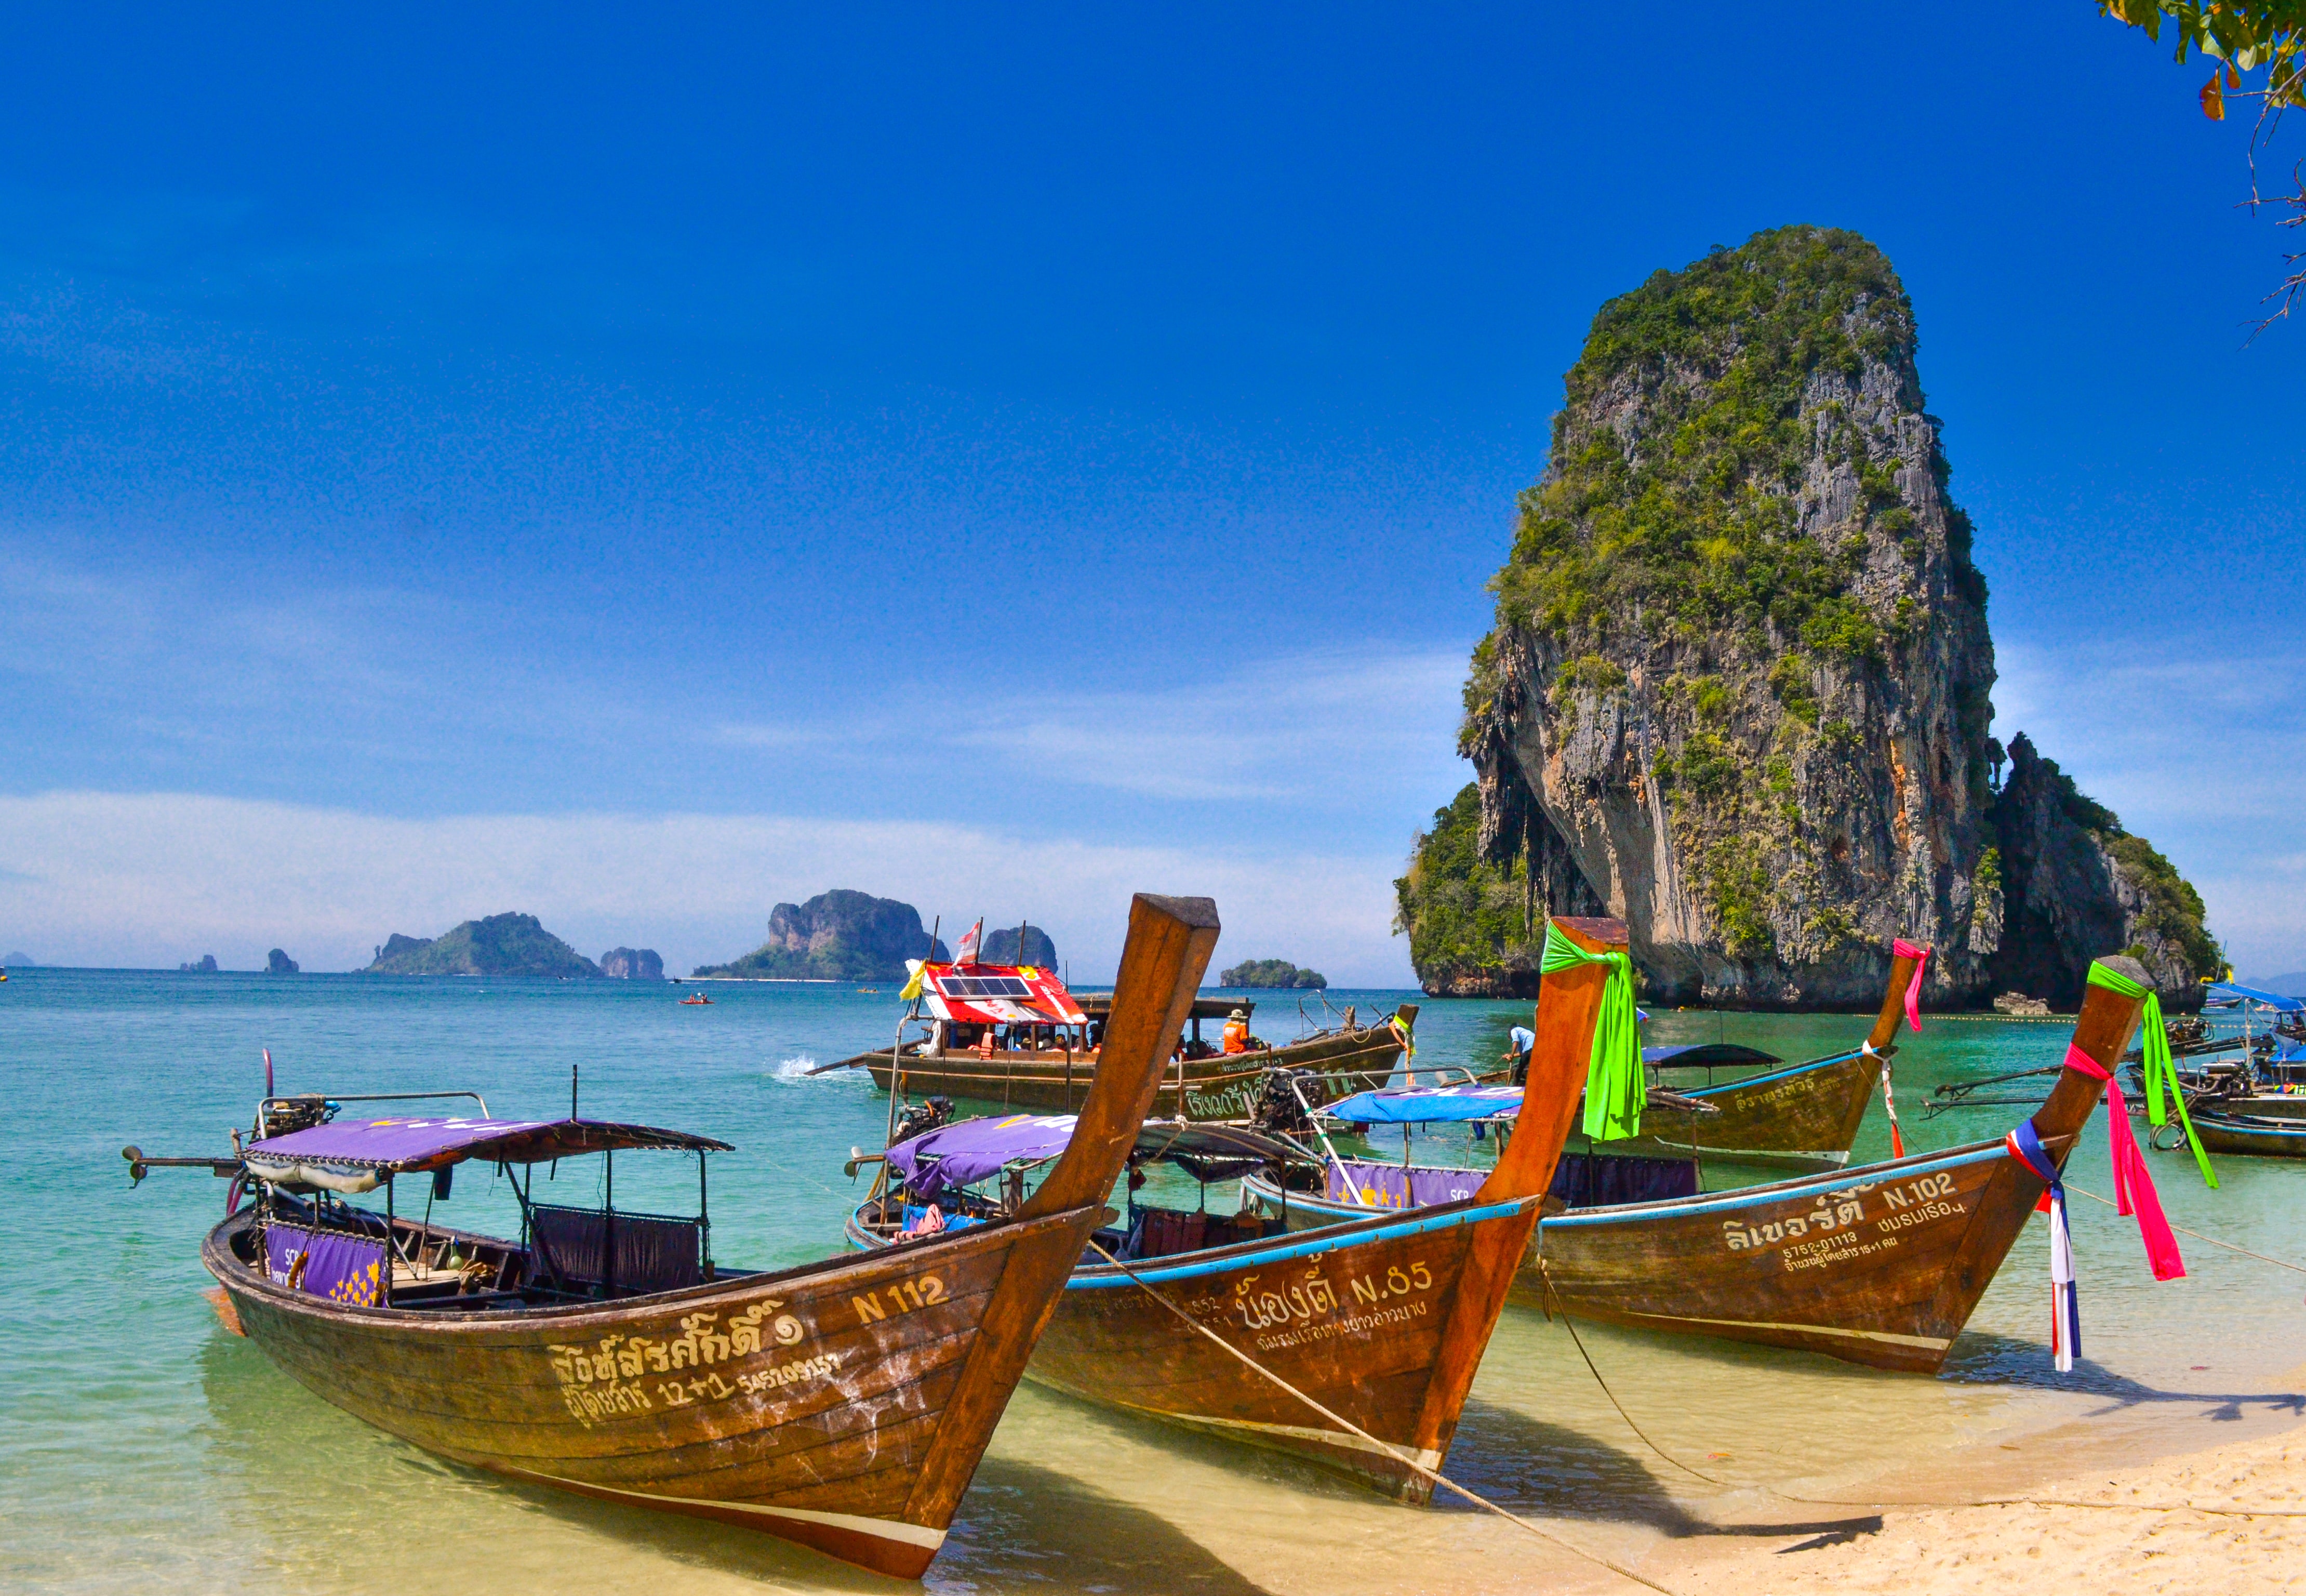 #Going to Thailand? Here’s 5 Tourist Traps To AVOID